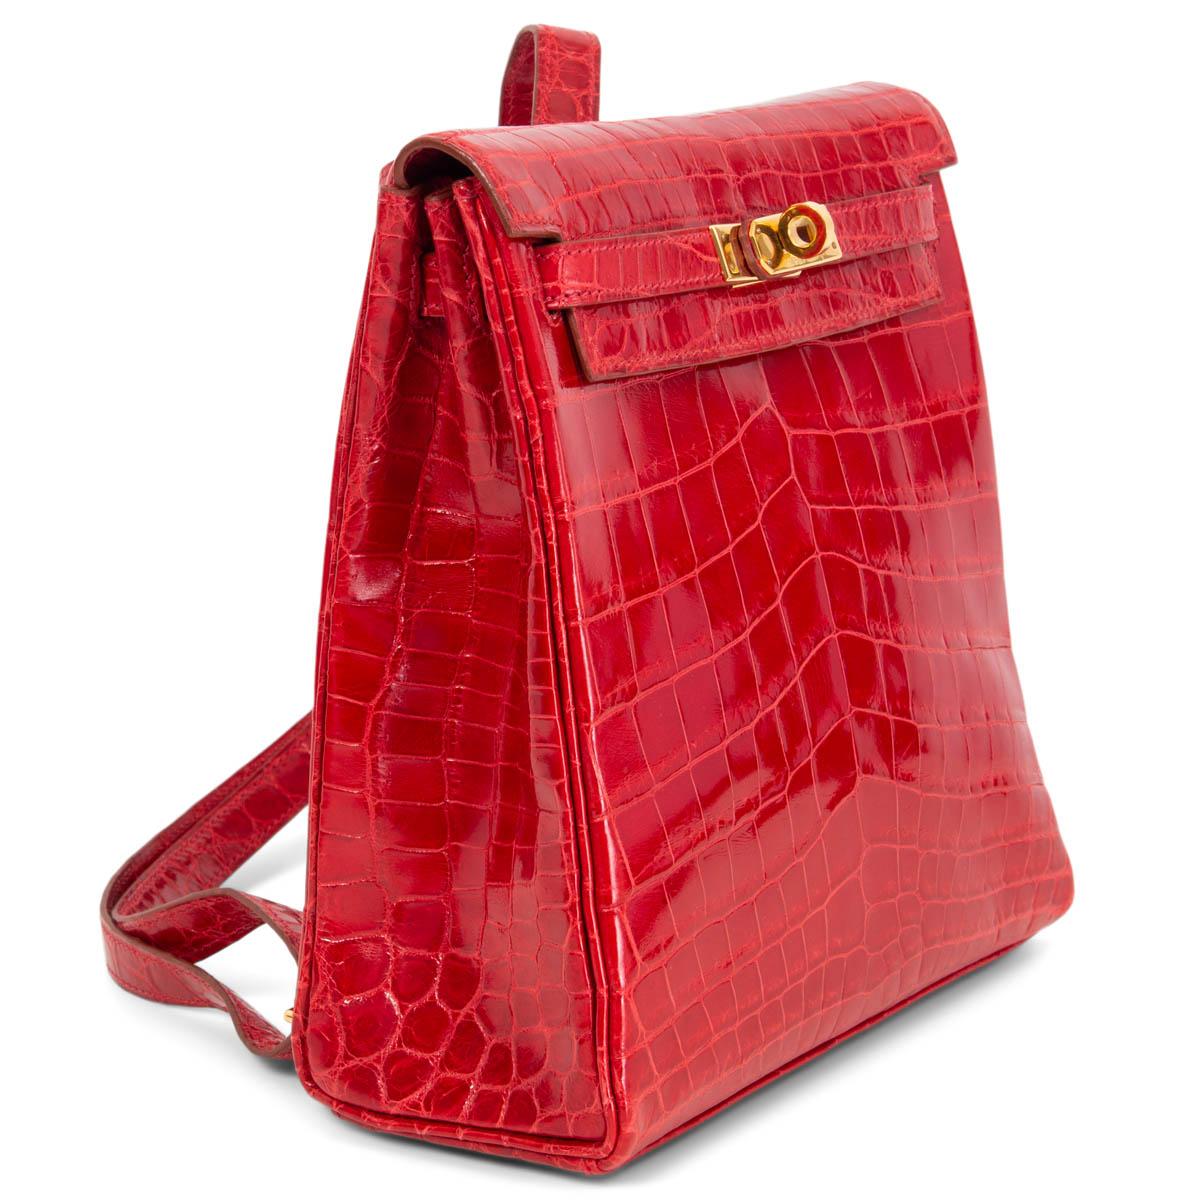 100% authentic Hermès Kelly A Dos backpack in Braise (bright red) shiny porous crocodile featuring gold-tone hardware and classic Kelly belt-style closure. Has two adjustable backpack straps and is lined in red Chevre leather with one slip pocket